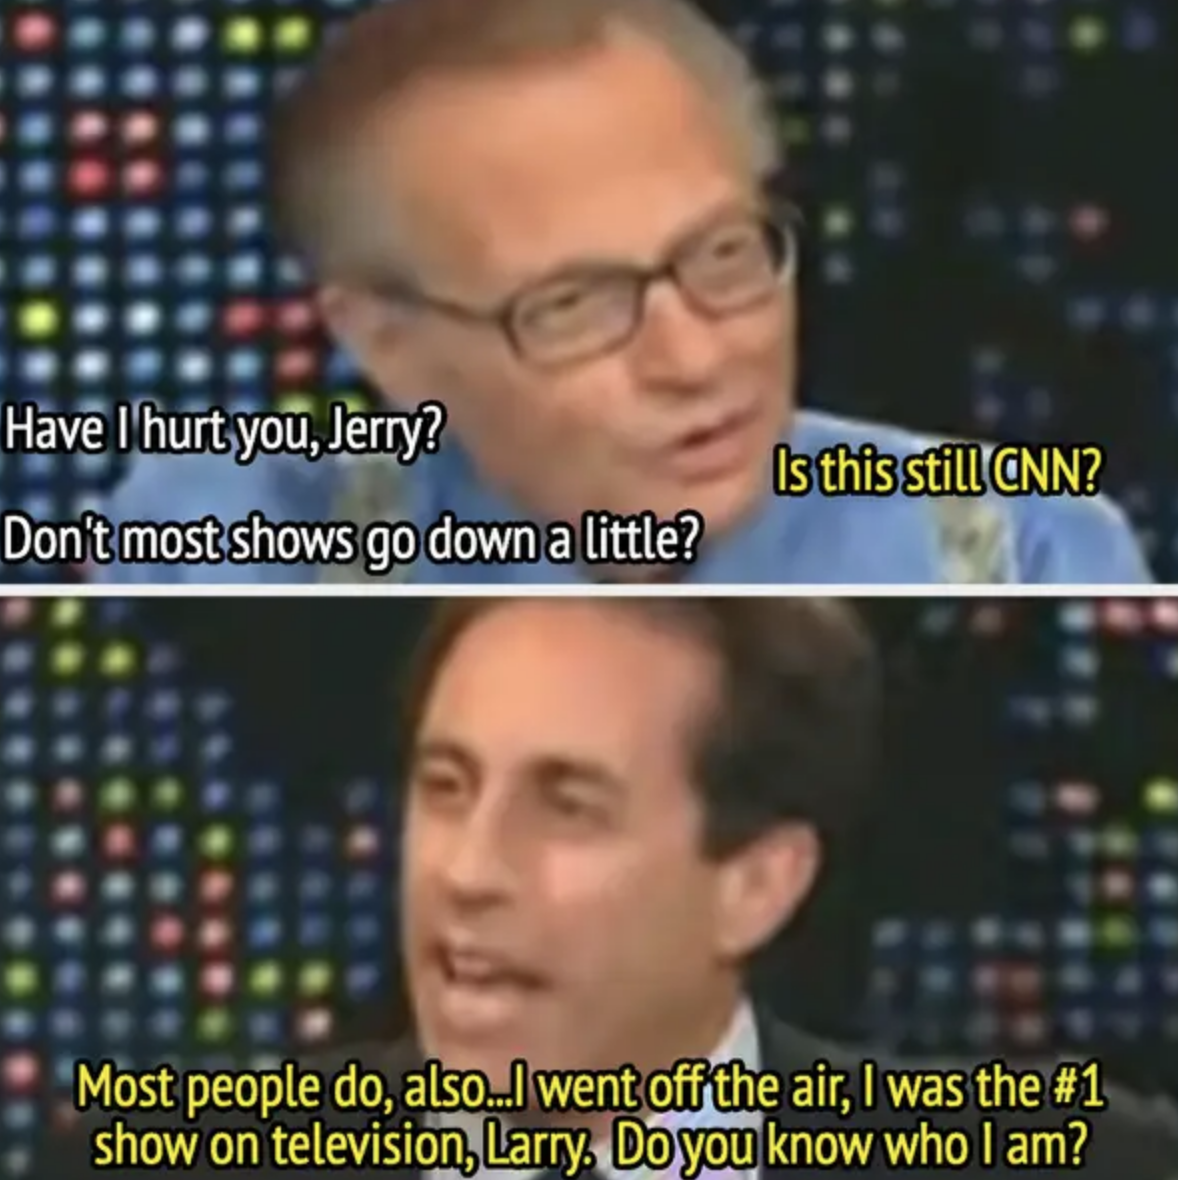 &quot;I went off the air, I was the #1 show on television, Larry.&quot;